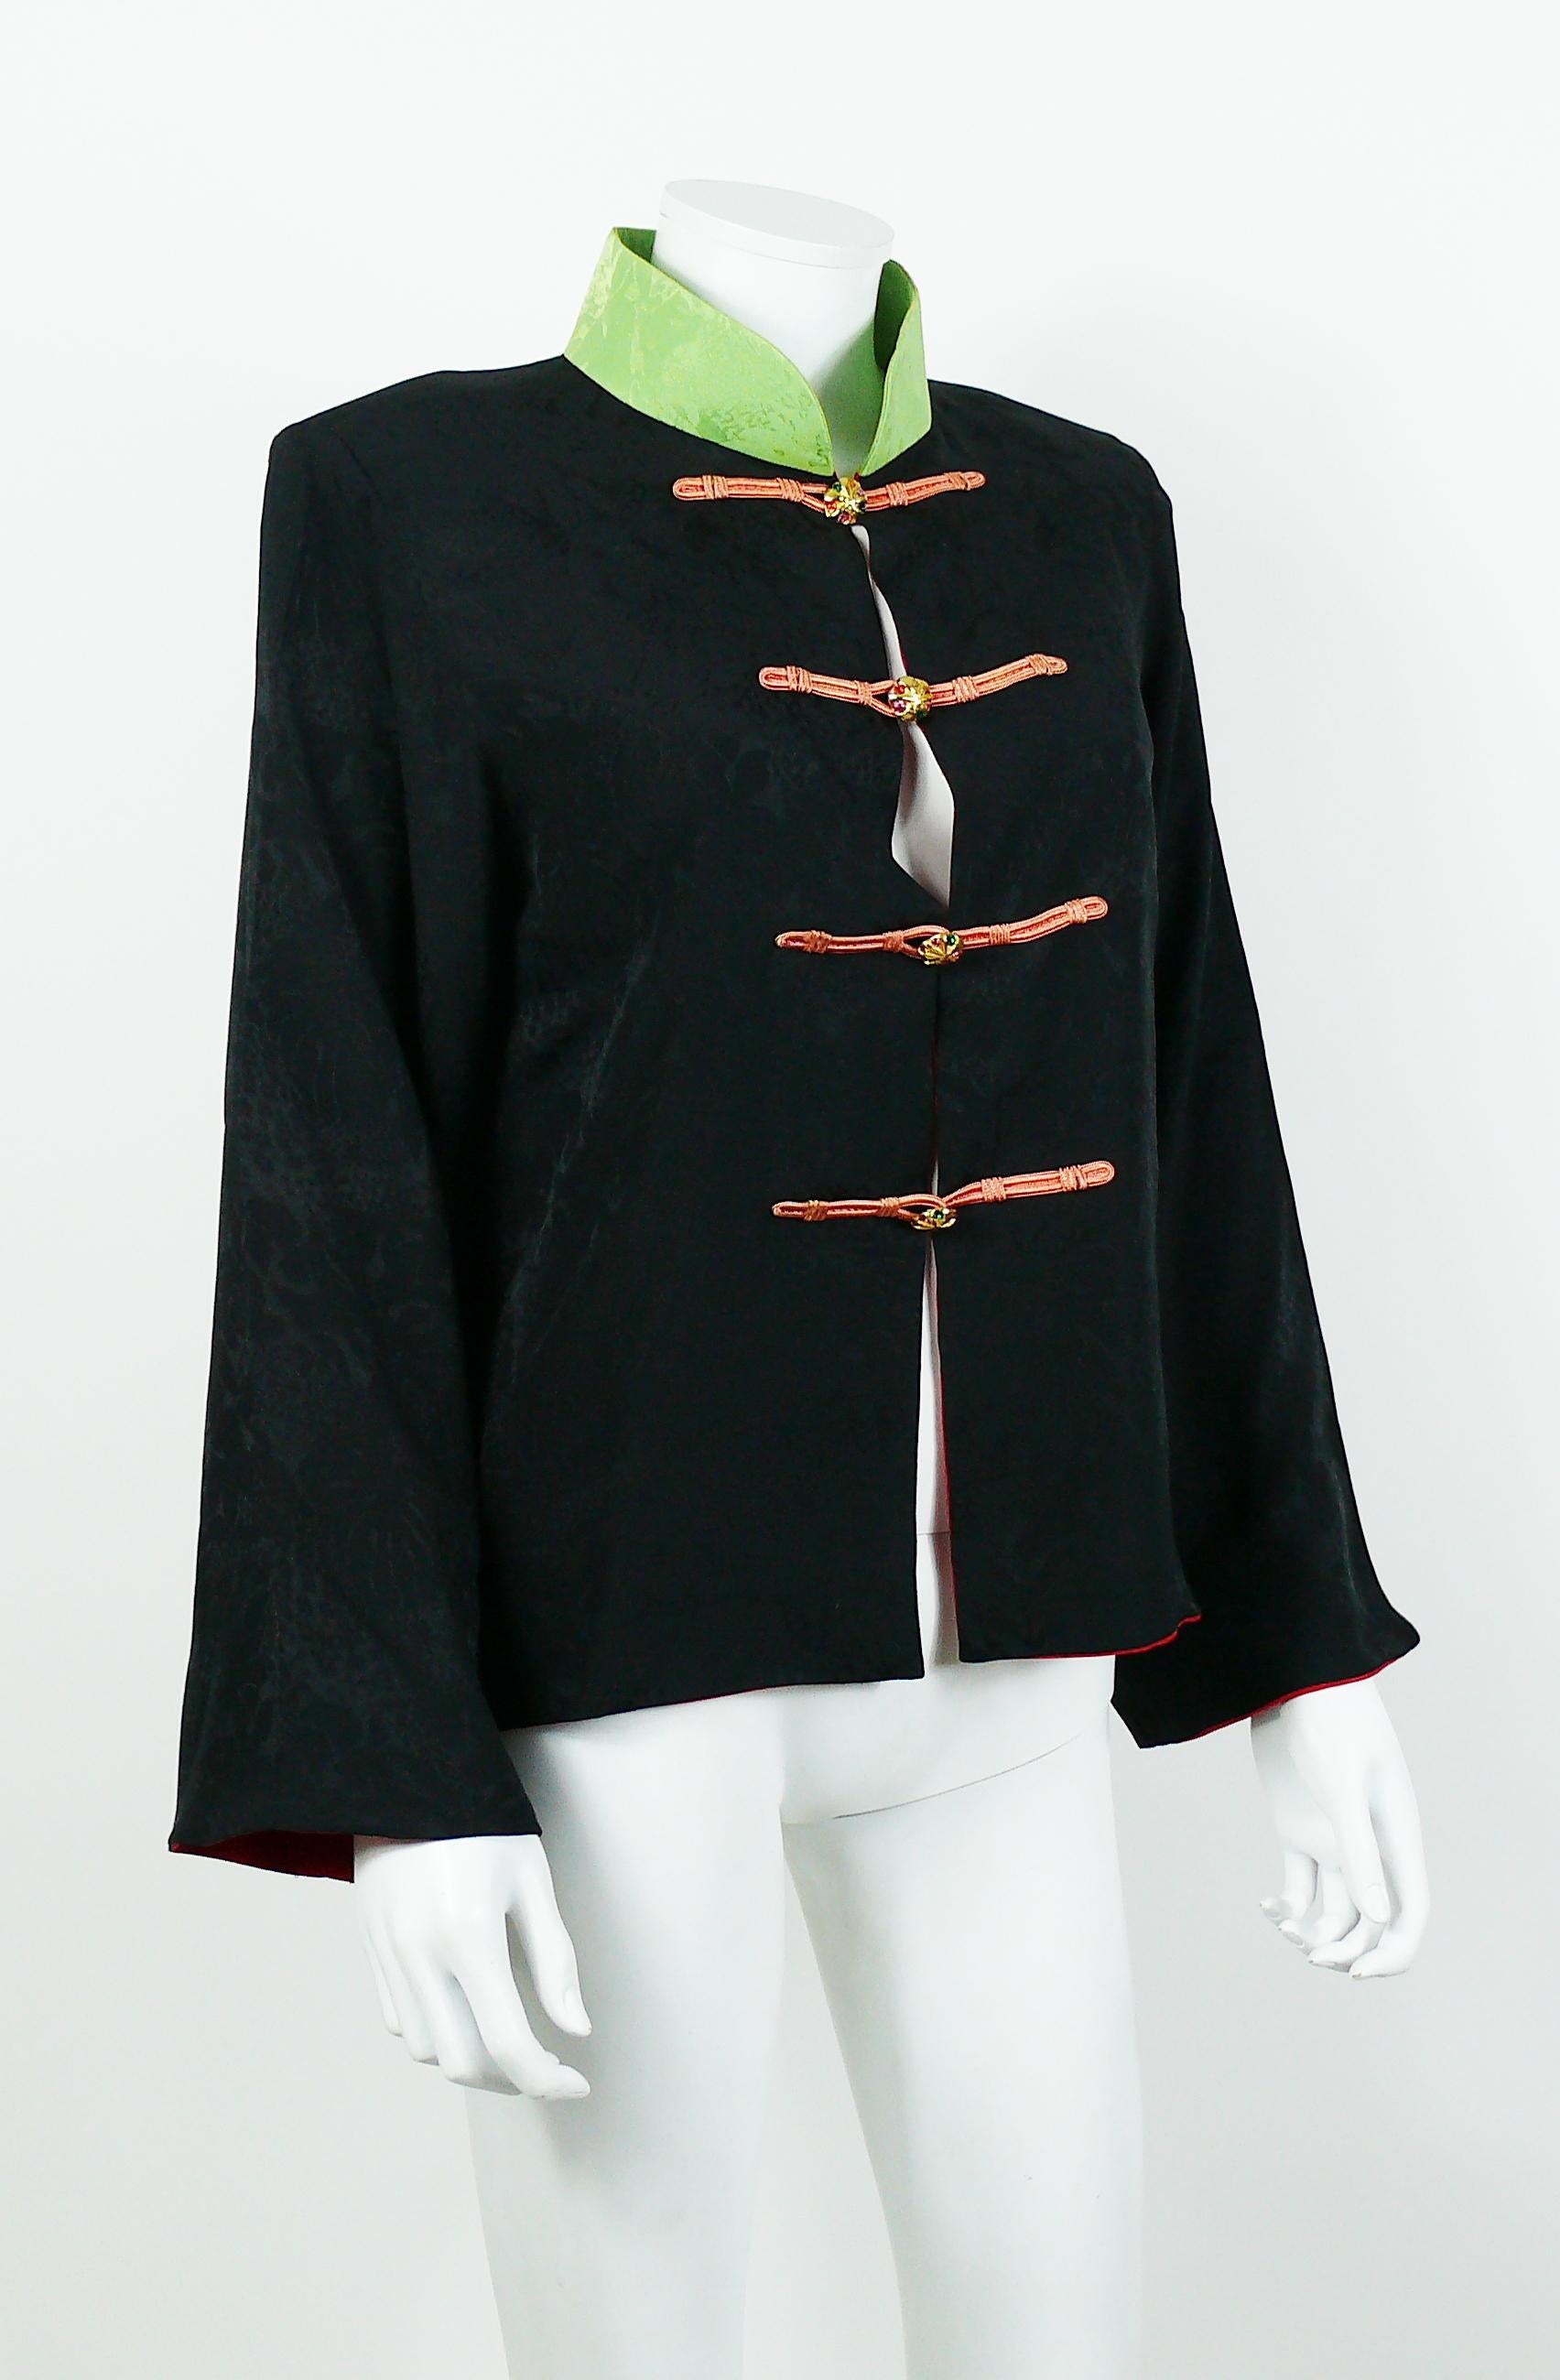 YVES SAINT LAURENT RIVE GAUCHE vintage Chinese Oriental inspired shirt jacket.

This shirt/jacket features :
- Black soft fabric (probably silk or silk blend) with floral design.
- Green mandarin collar.
- Chinese frog closure with jewelled gold